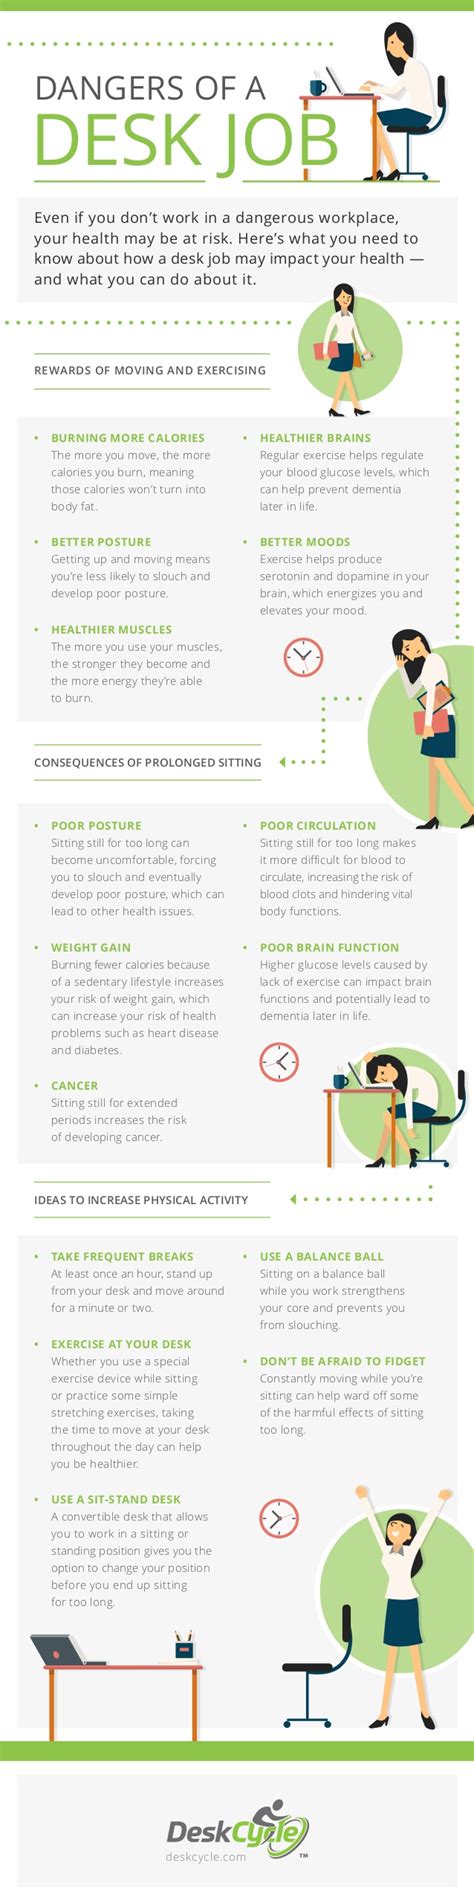 The 5 Dangers Of A Desk Job Infographic